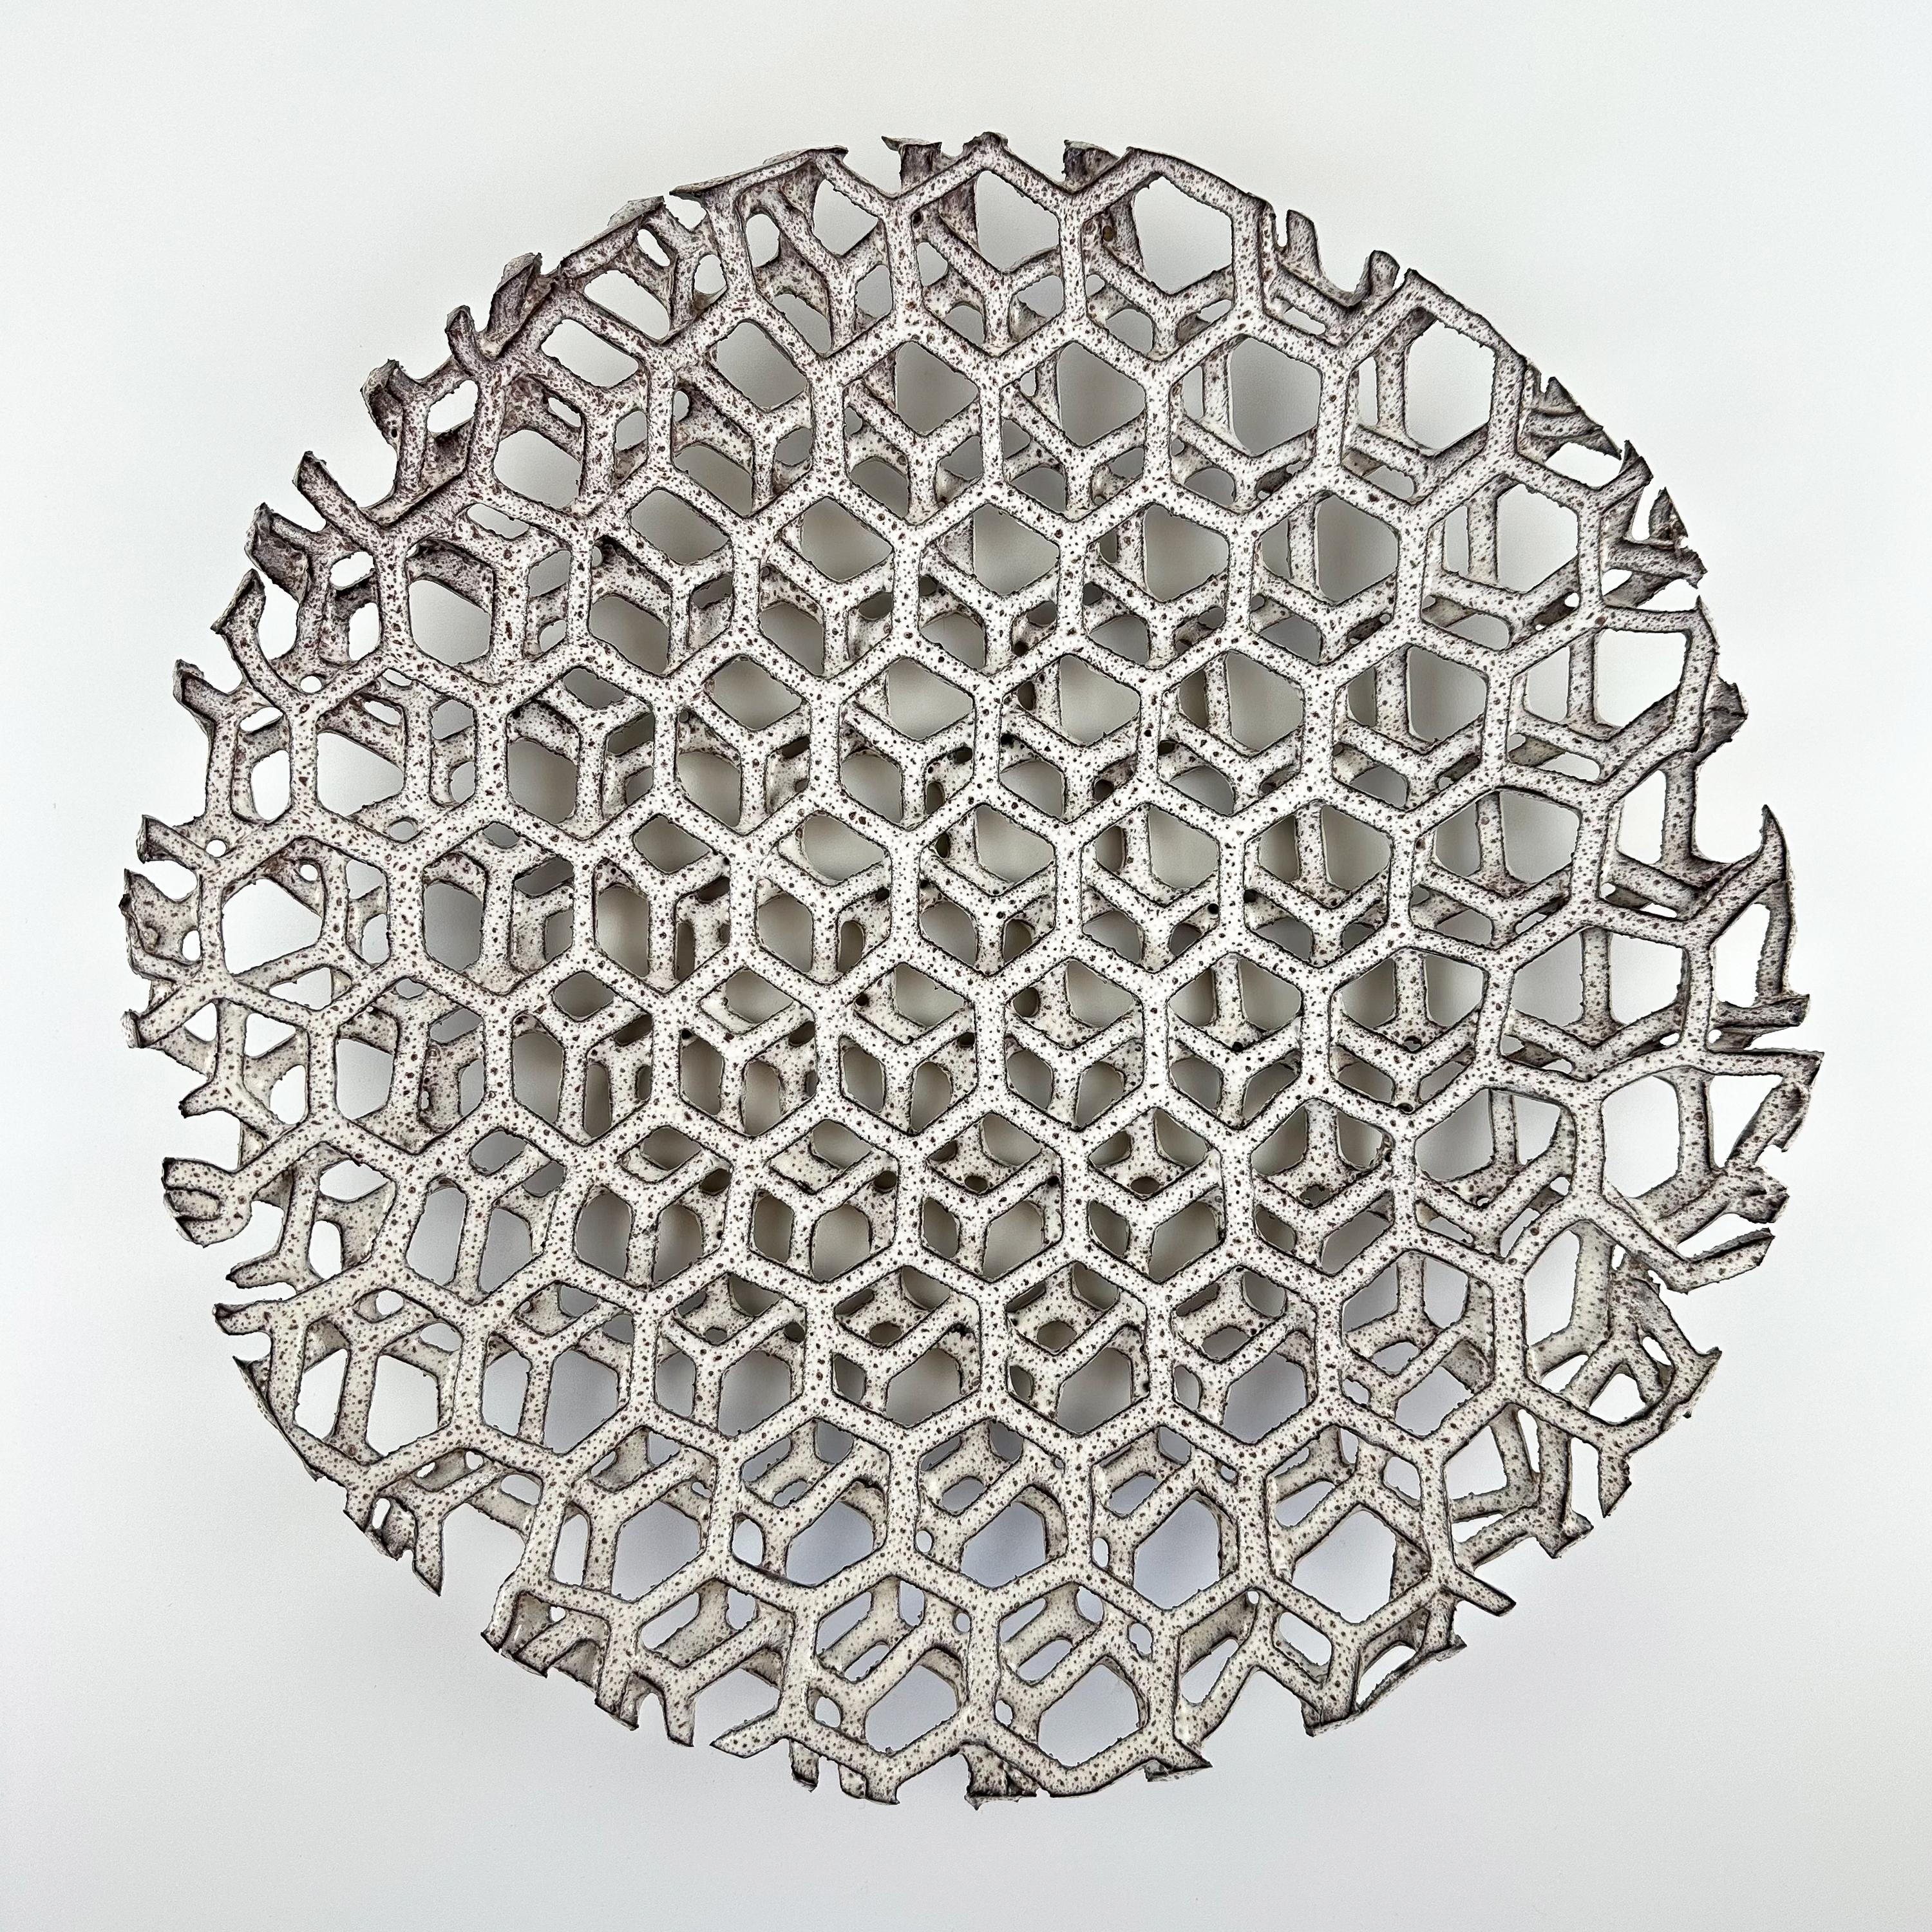 A very rare and uncommon Alessio Tasca (b. 1929) geometric layered ceramic centerpiece, Italy circa 1970s. This modern low centerpiece fruit bowl is comprised of 3 layers of ceramic lattice with a hexagon shape design. These delicate layers are